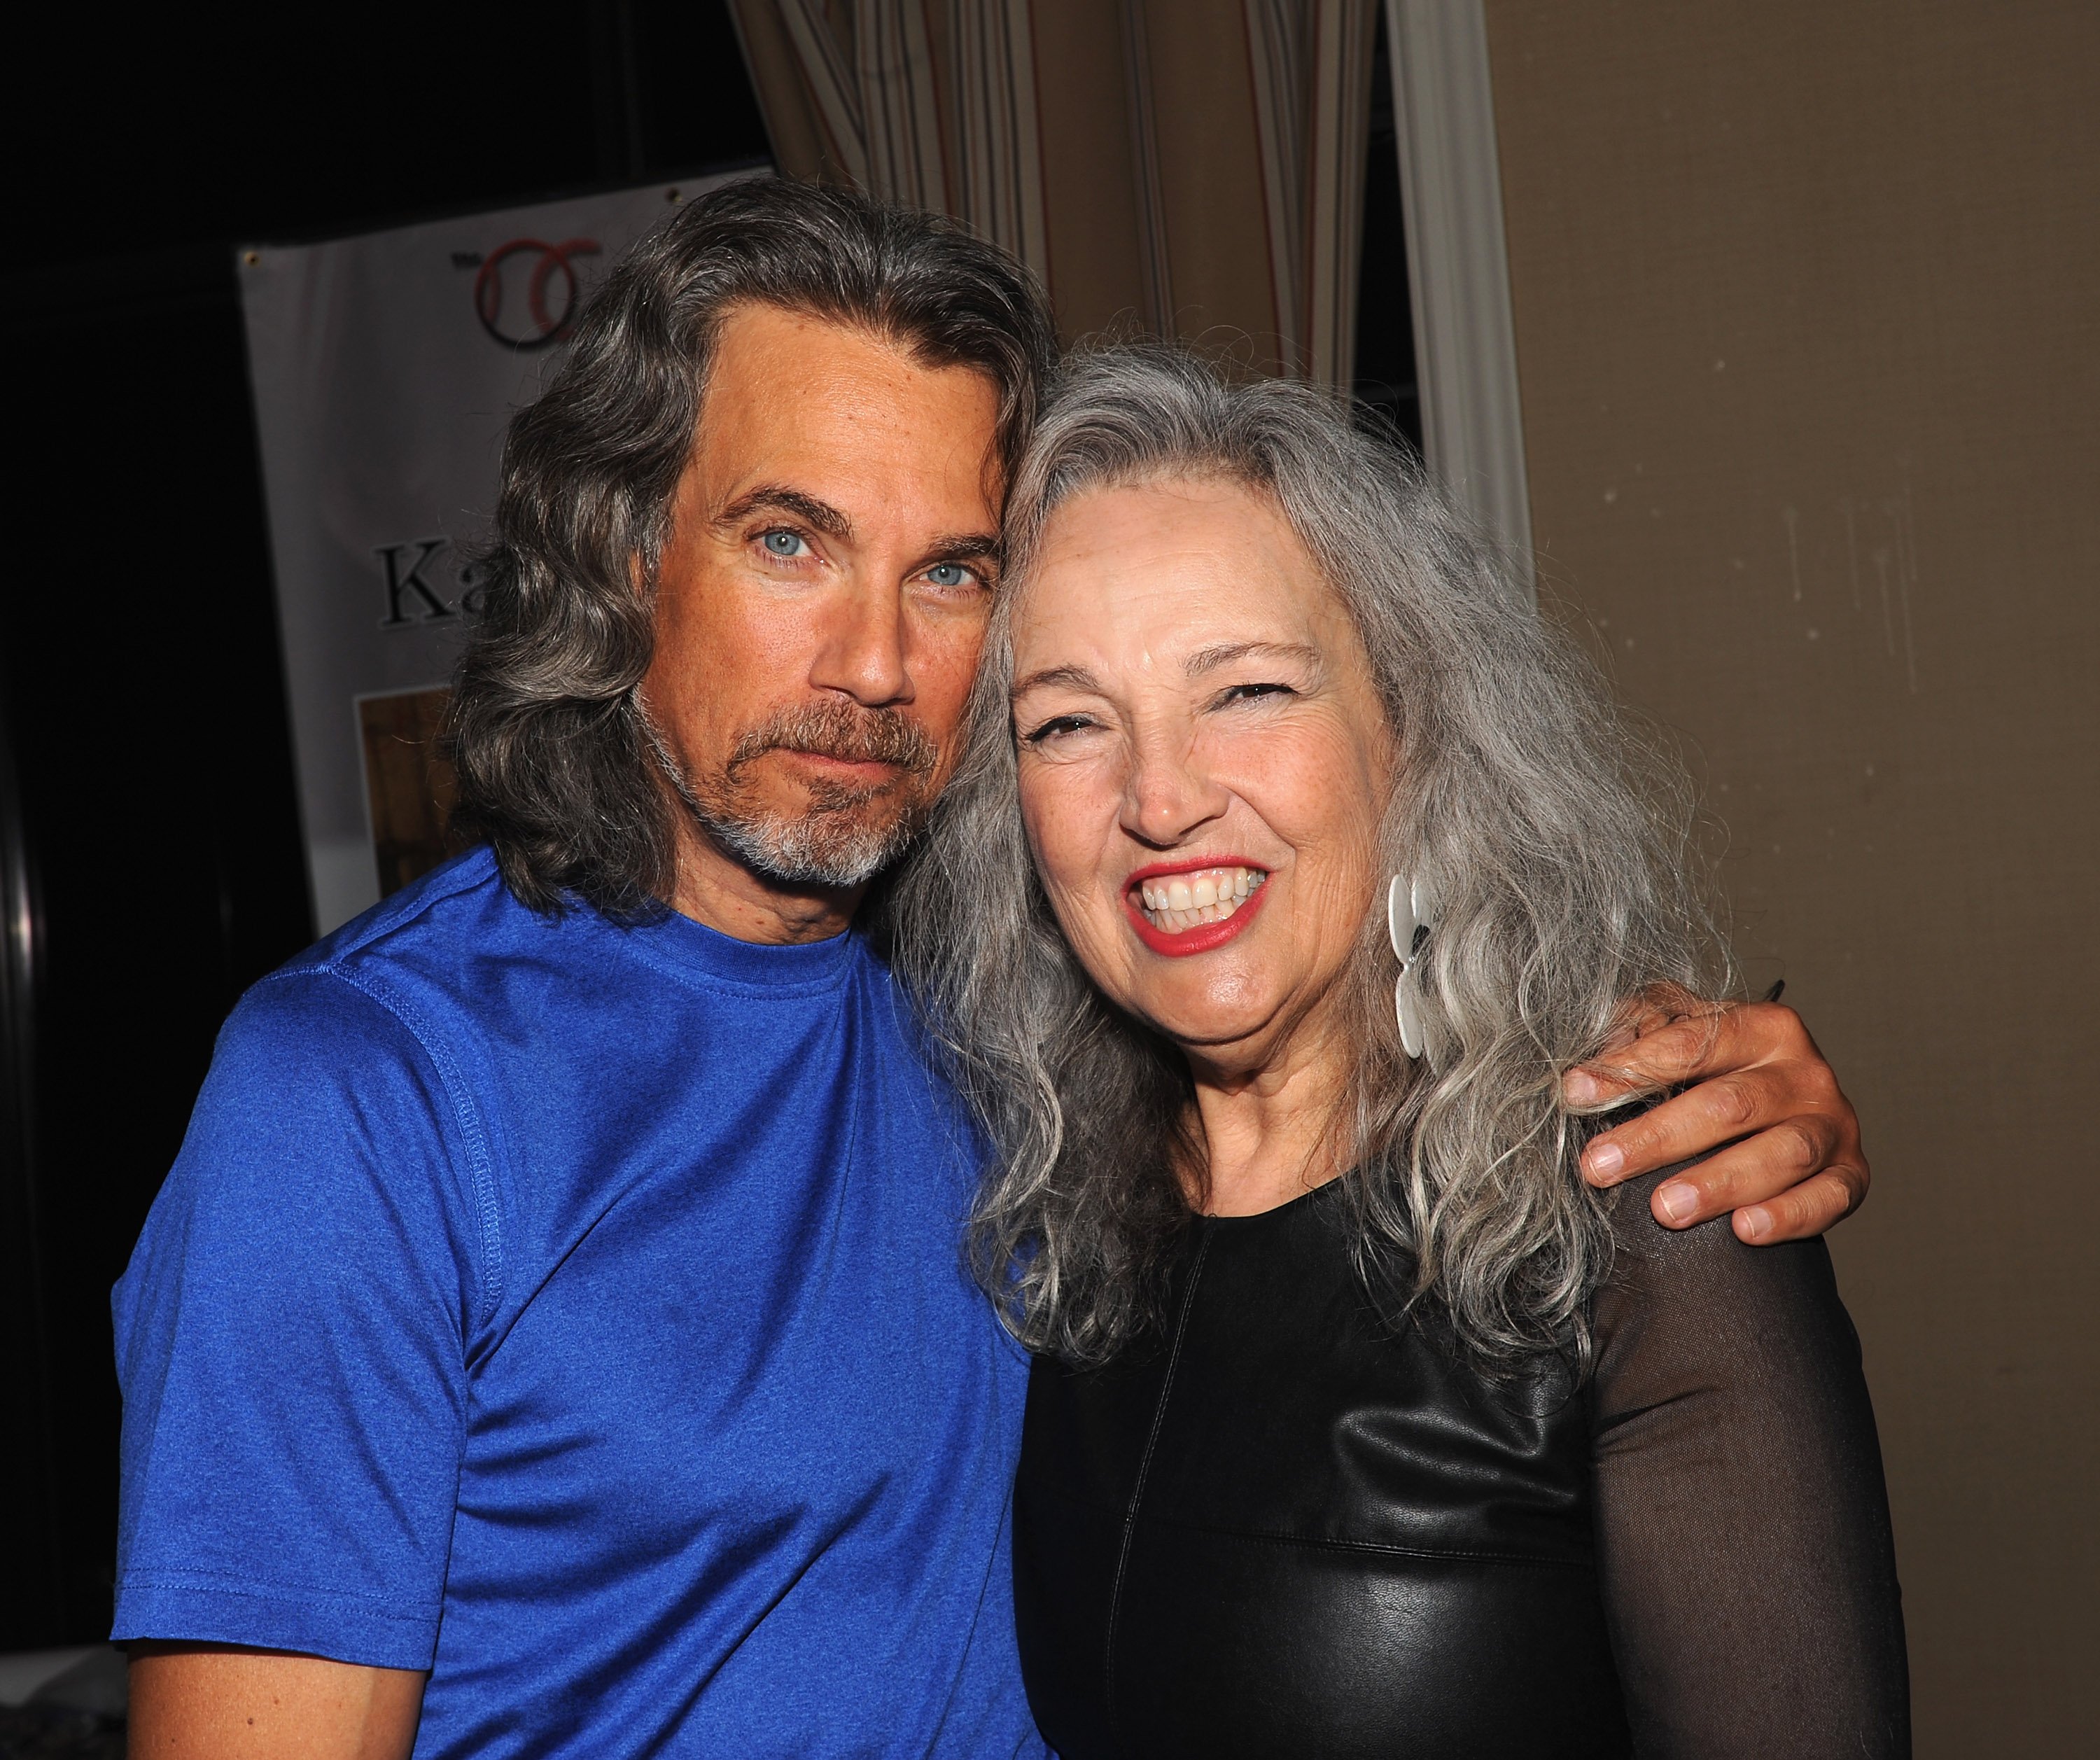 Robby Benson and Karla DeVito attending the Chiller Theatre Expo - Day 1, 2015, Parsippany, New Jersey. | Photo: Getty Images